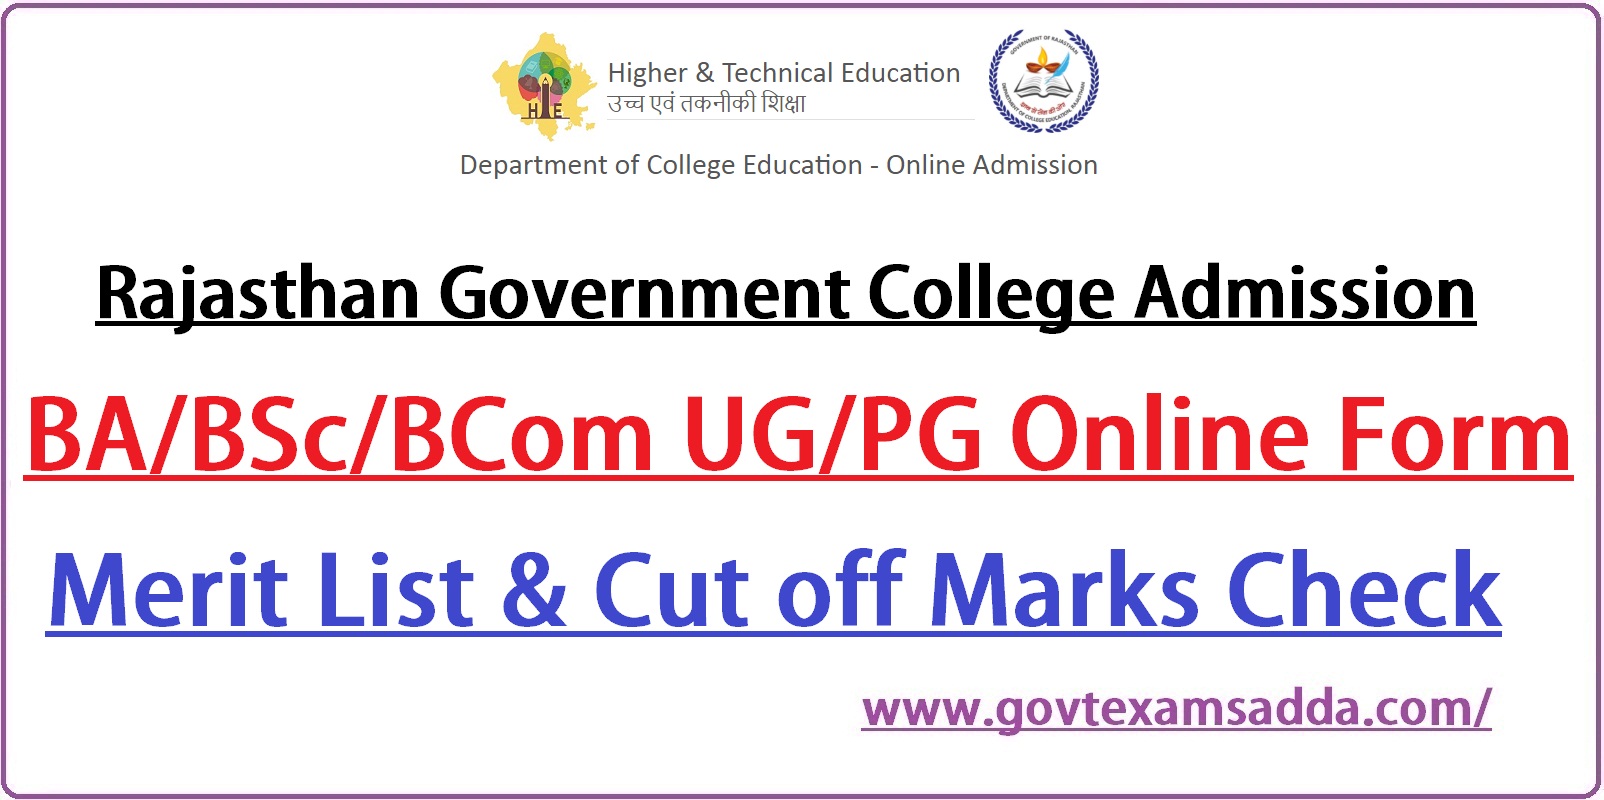 Rajasthan Government College Admission 2022-23